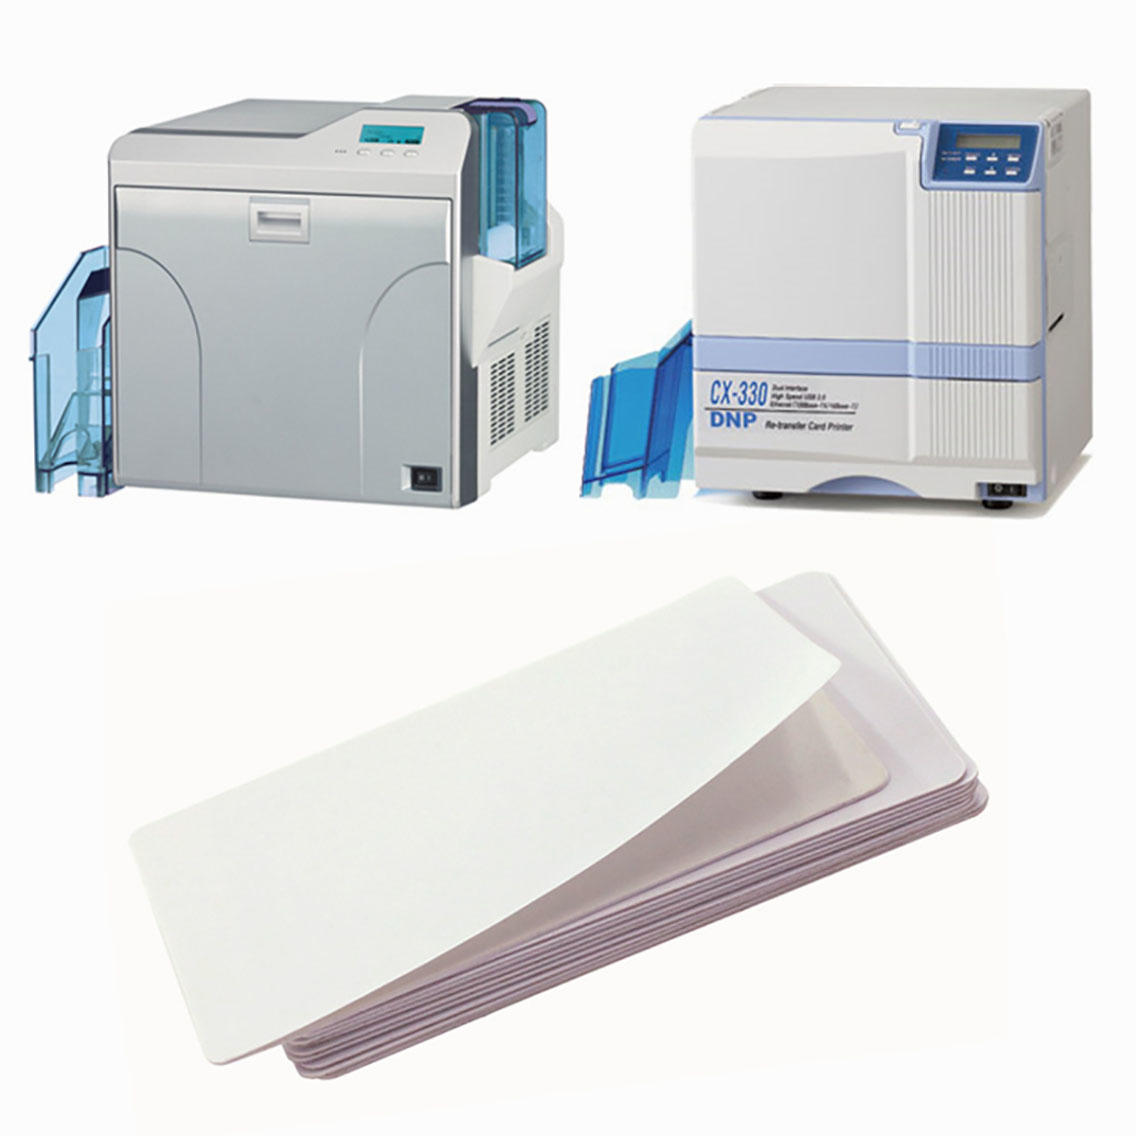 Cleanmo ODM best Dai Nippon IPA Cleaning wipes supplier for DNP CX-210, CX-320 & CX-330 Printers